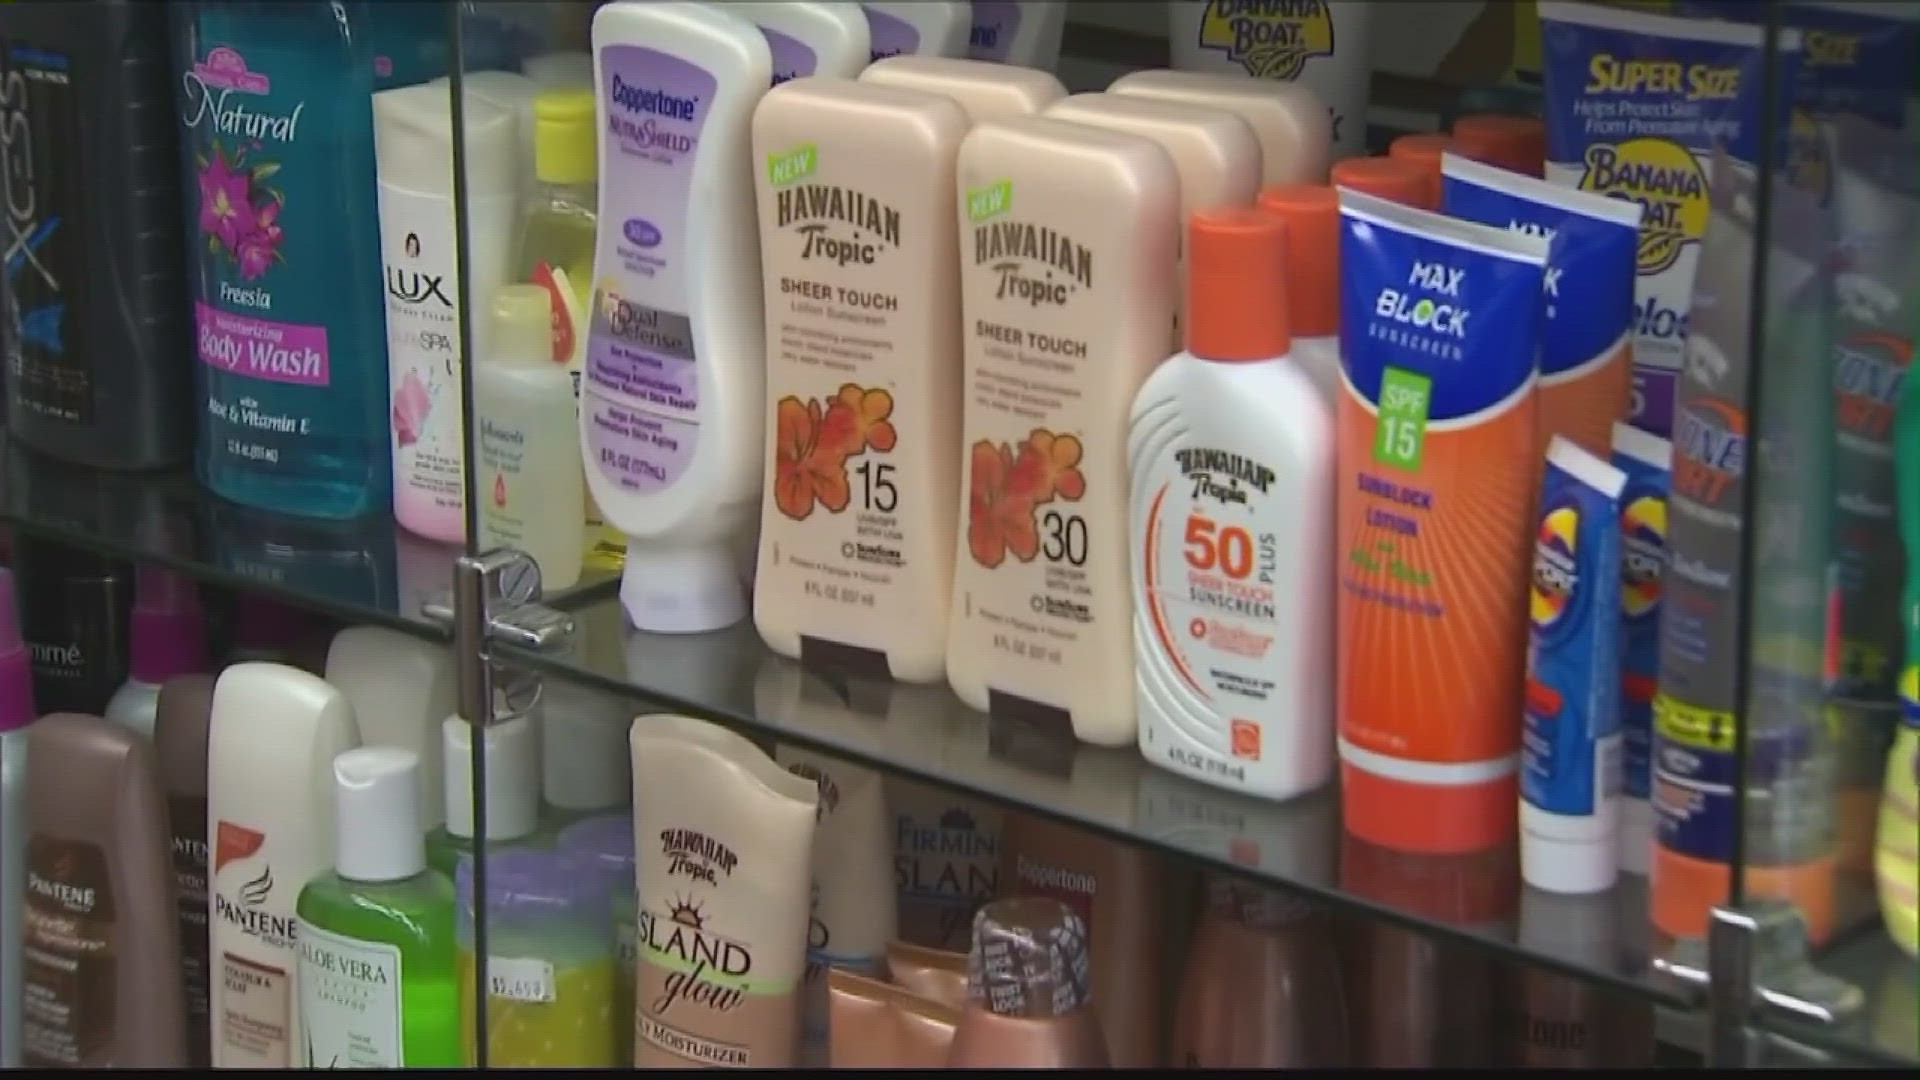 Consumer Reports tests dozens of varieties each year to find the best options that won't burn your skin or a hole in your wallet.